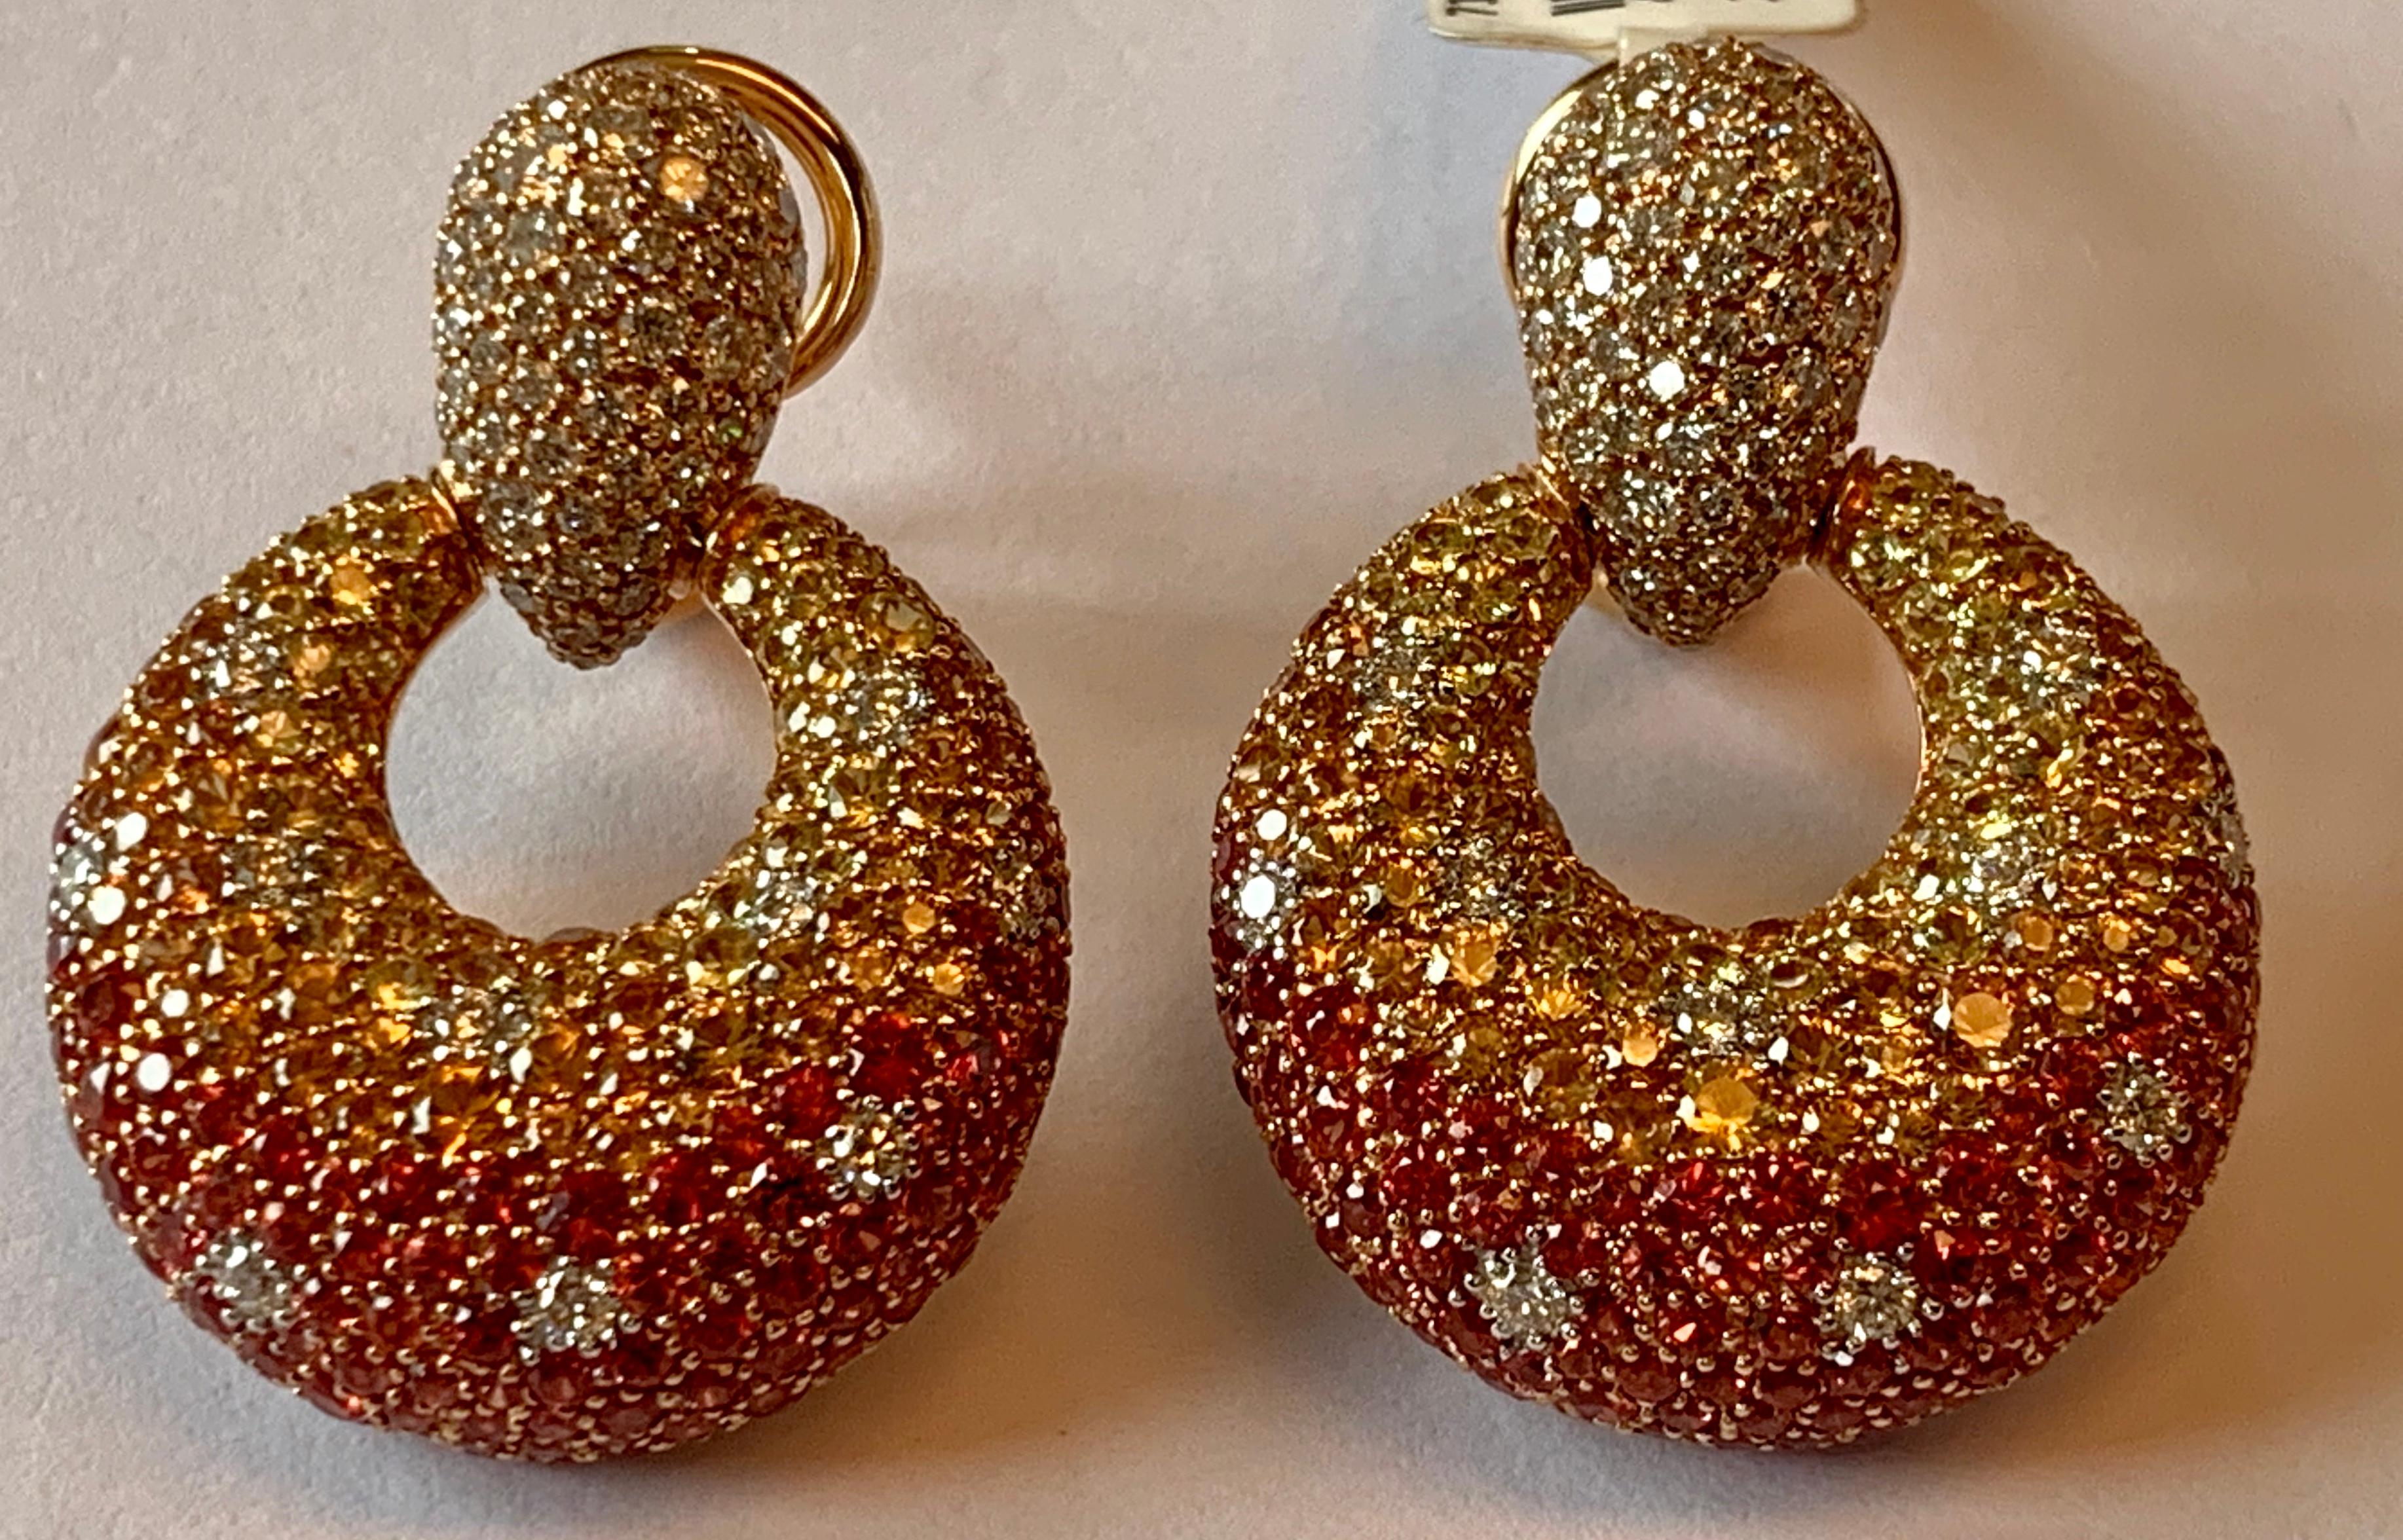 Gorgeous 18 K pink Gold earrings featuring 415 pave set yellow and orange Sapphires with a weight of 7.82 ct and 142 pave set brilliant cut Diamonds weighing 1.78 ct, G color, vs clarity. 
Beautiful color combination!
Authenticity and money back is